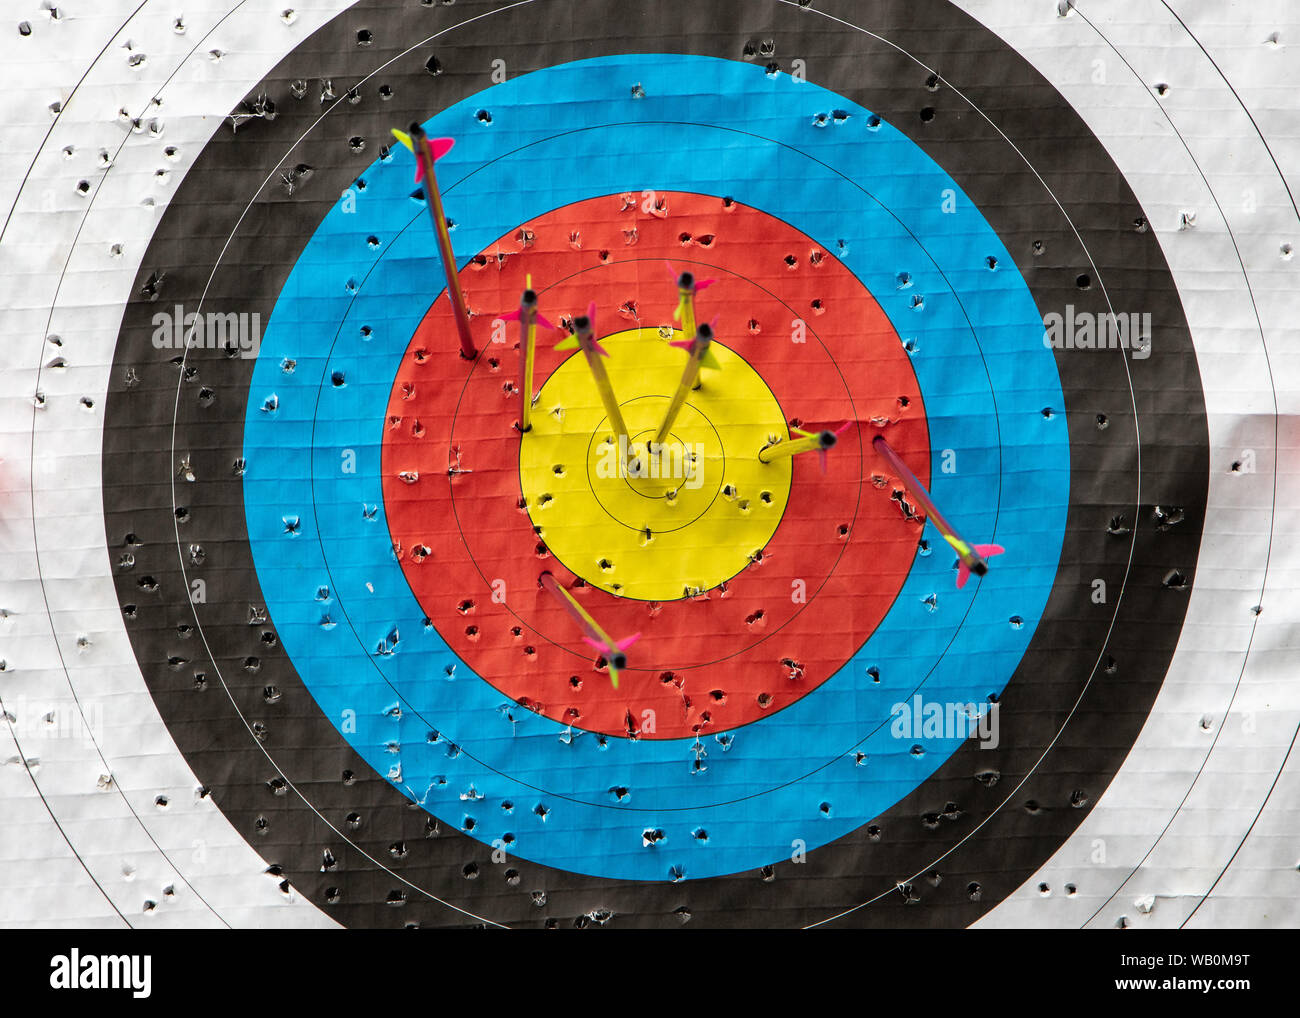 Detail of an archery target with 6 arrows inside the target and may holes. Concept of archery sport or achieving a targer. Stock Photo